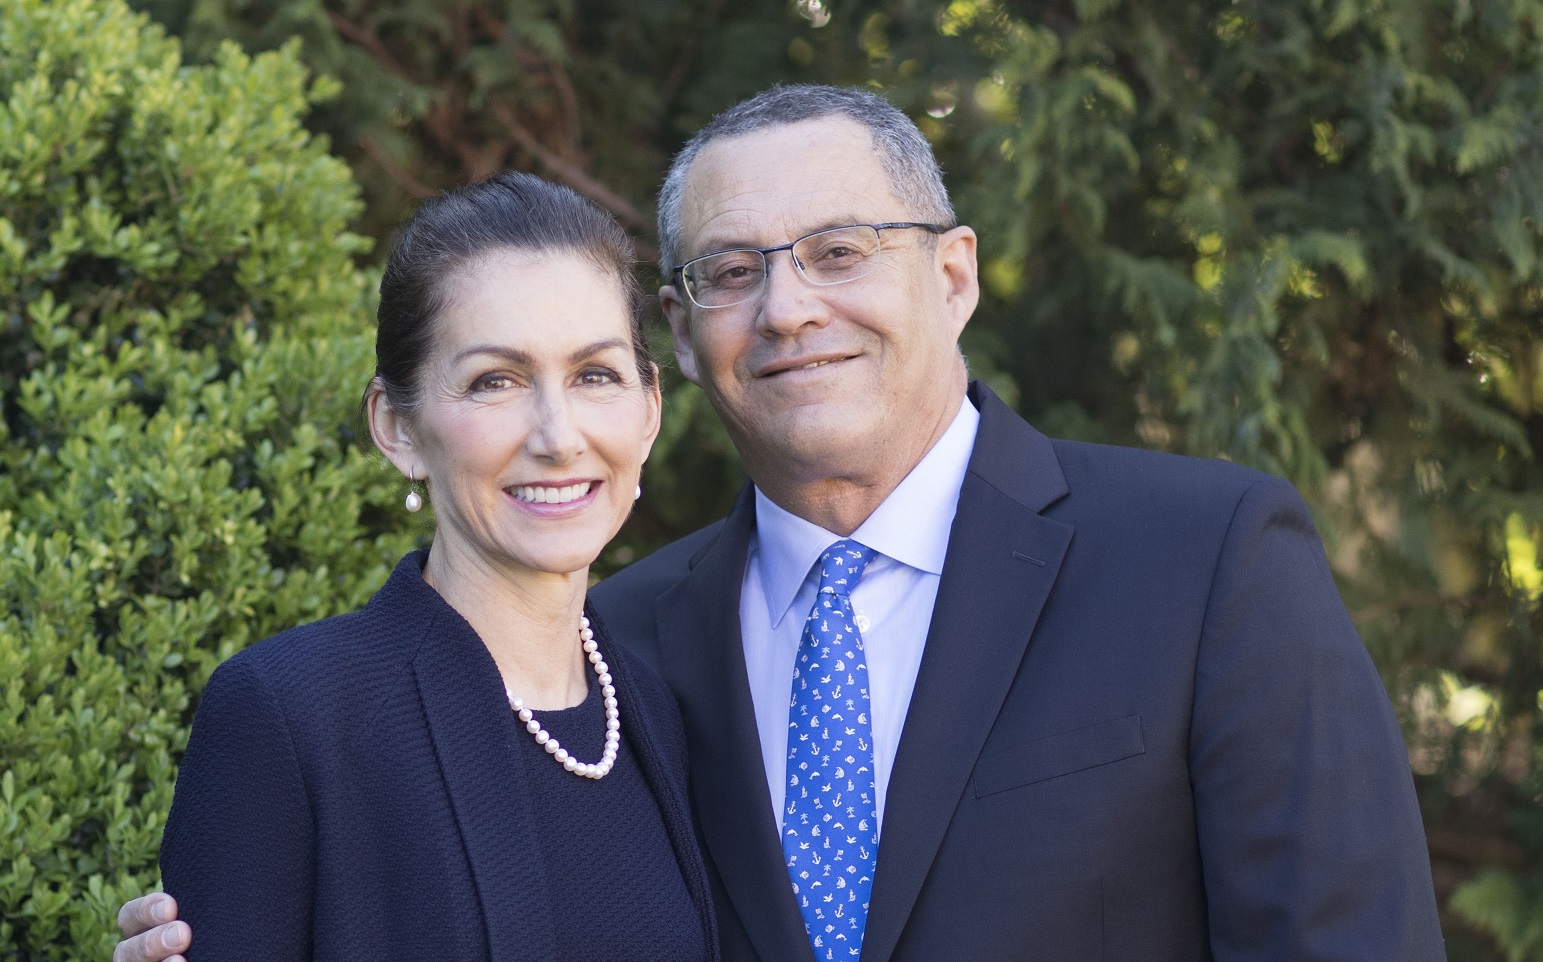 Dr. Heather Furnas and Dr. Francisco Canales